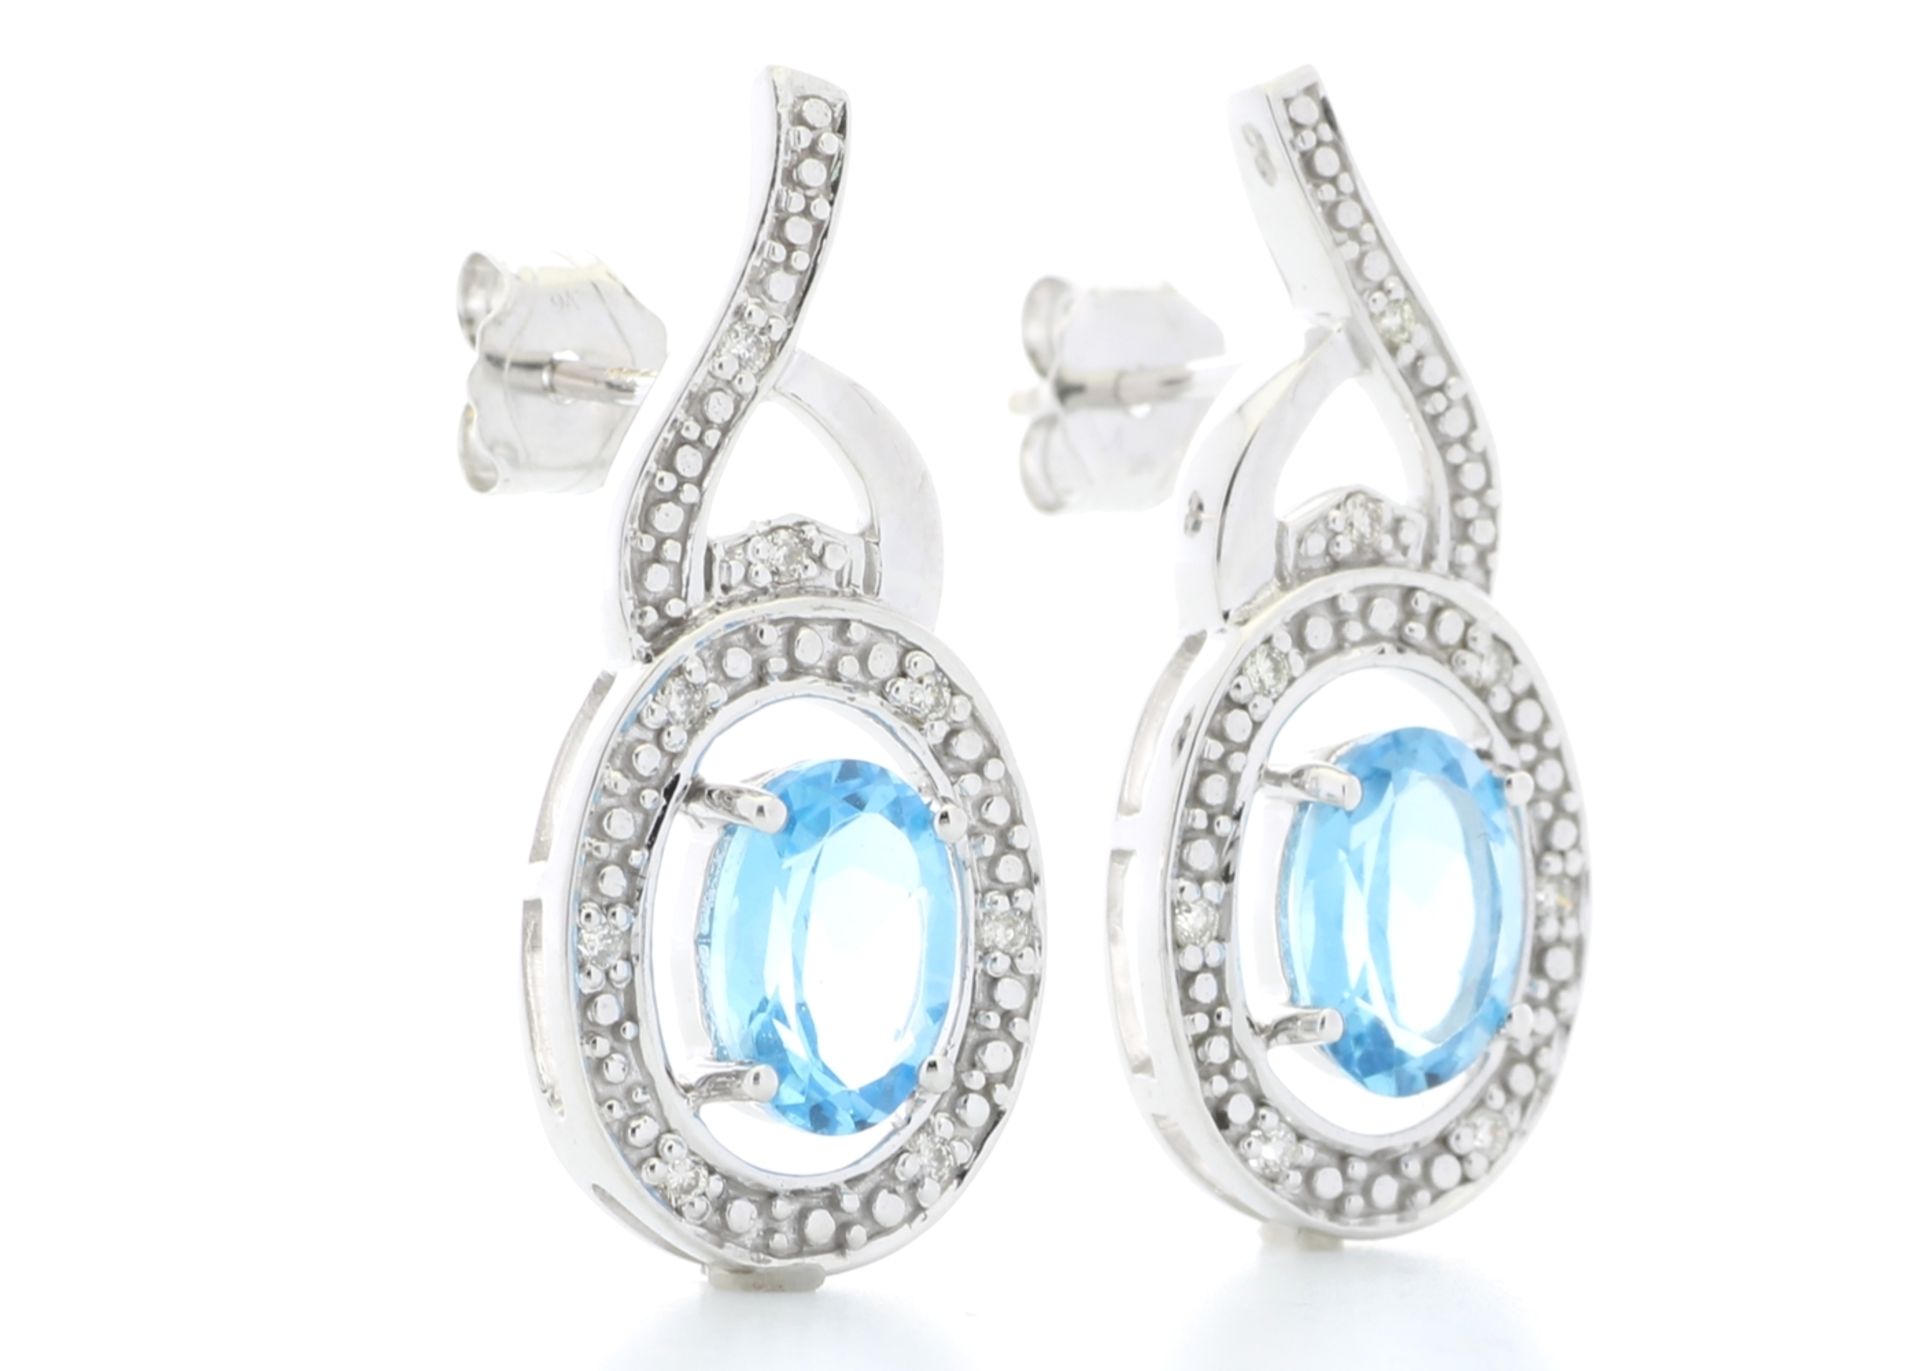 9ct White Gold Diamond And Blue Topaz Earring 0.05 Carats - Valued by GIE £2,195.00 - A beautiful - Image 4 of 5